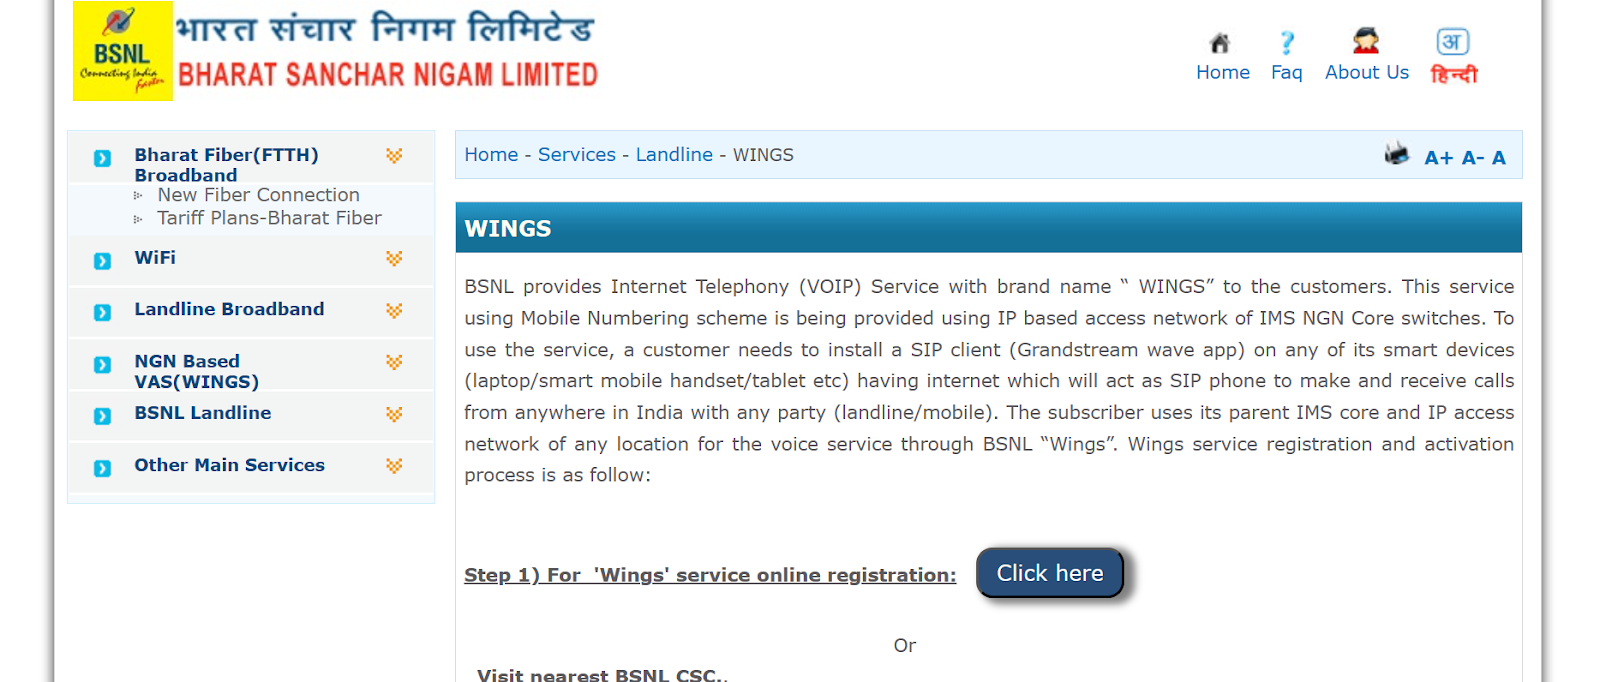 BSNL Wings website snapshot highlighting the services it provides.